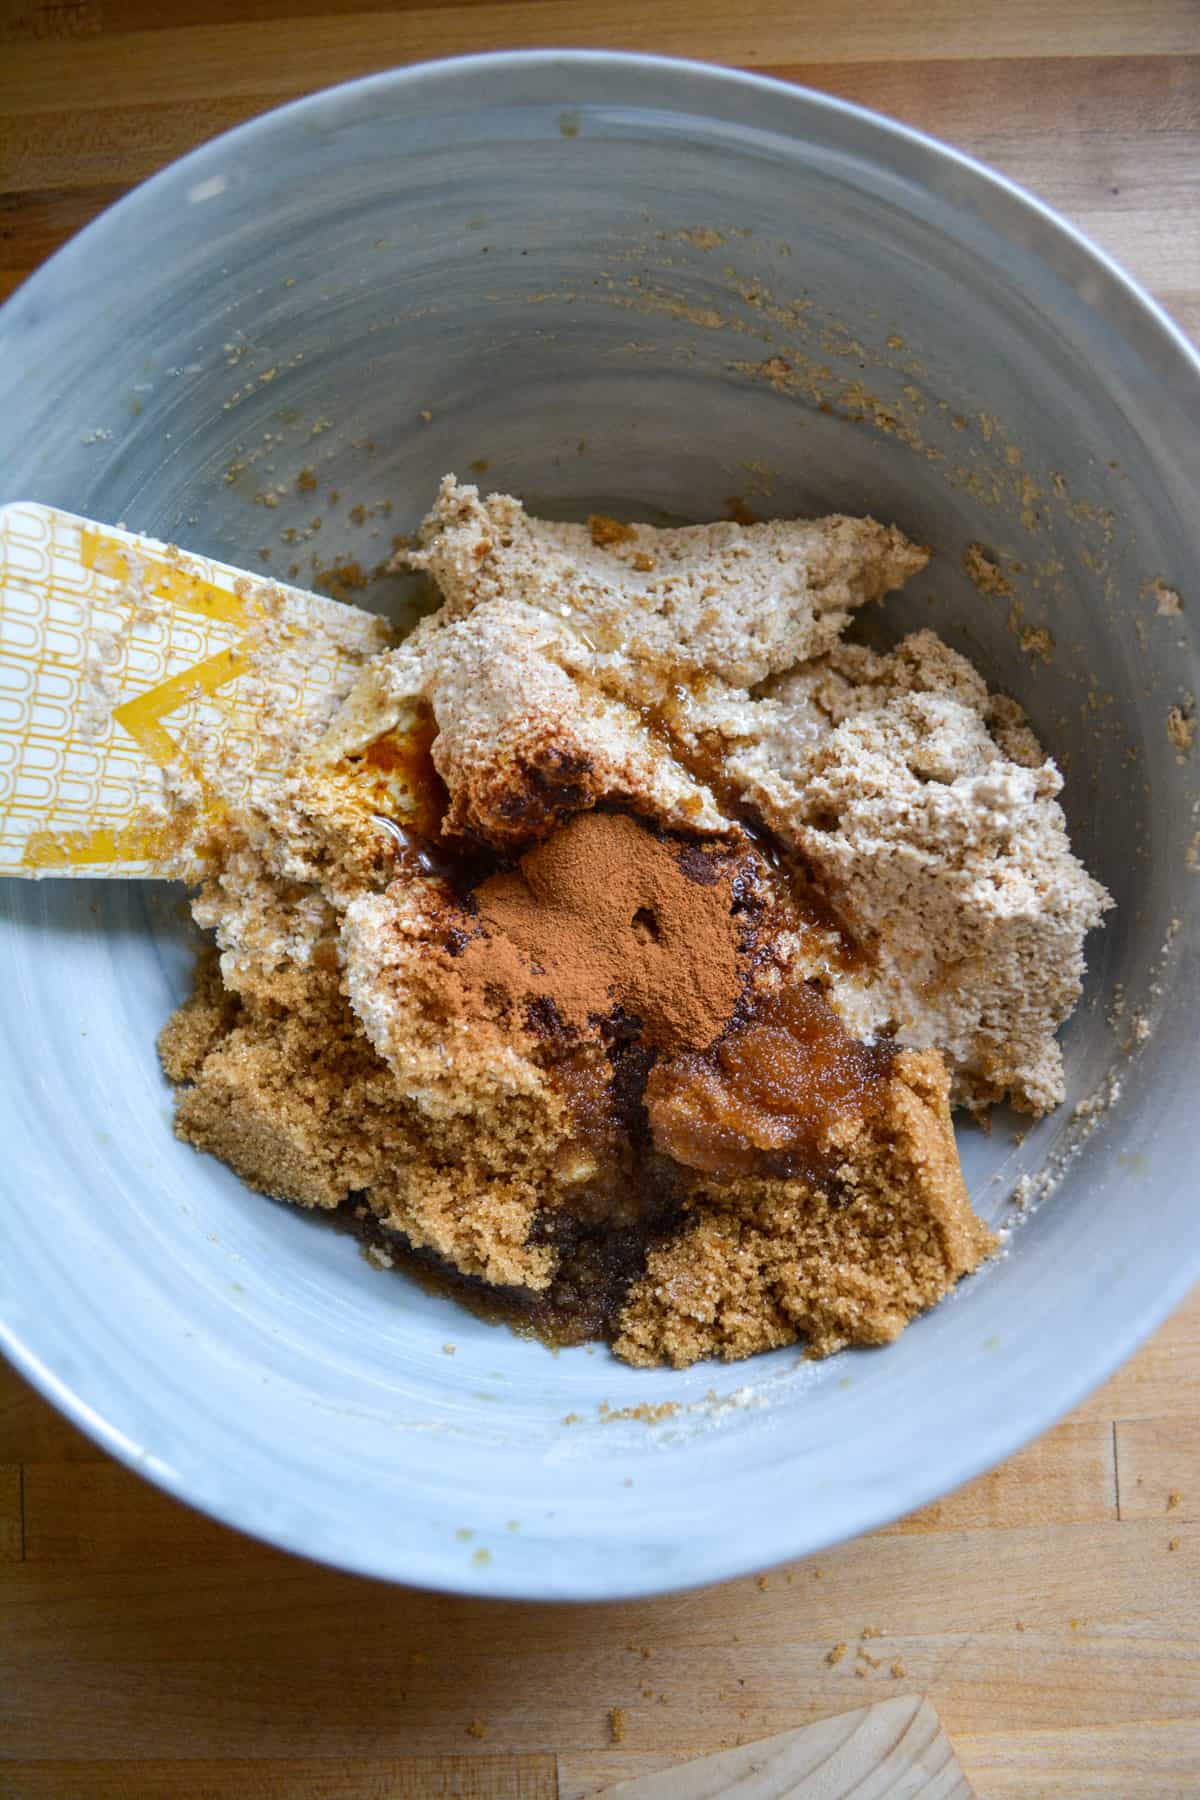 Adding sugar, cinnamon and oil into the soaked oat mixture.